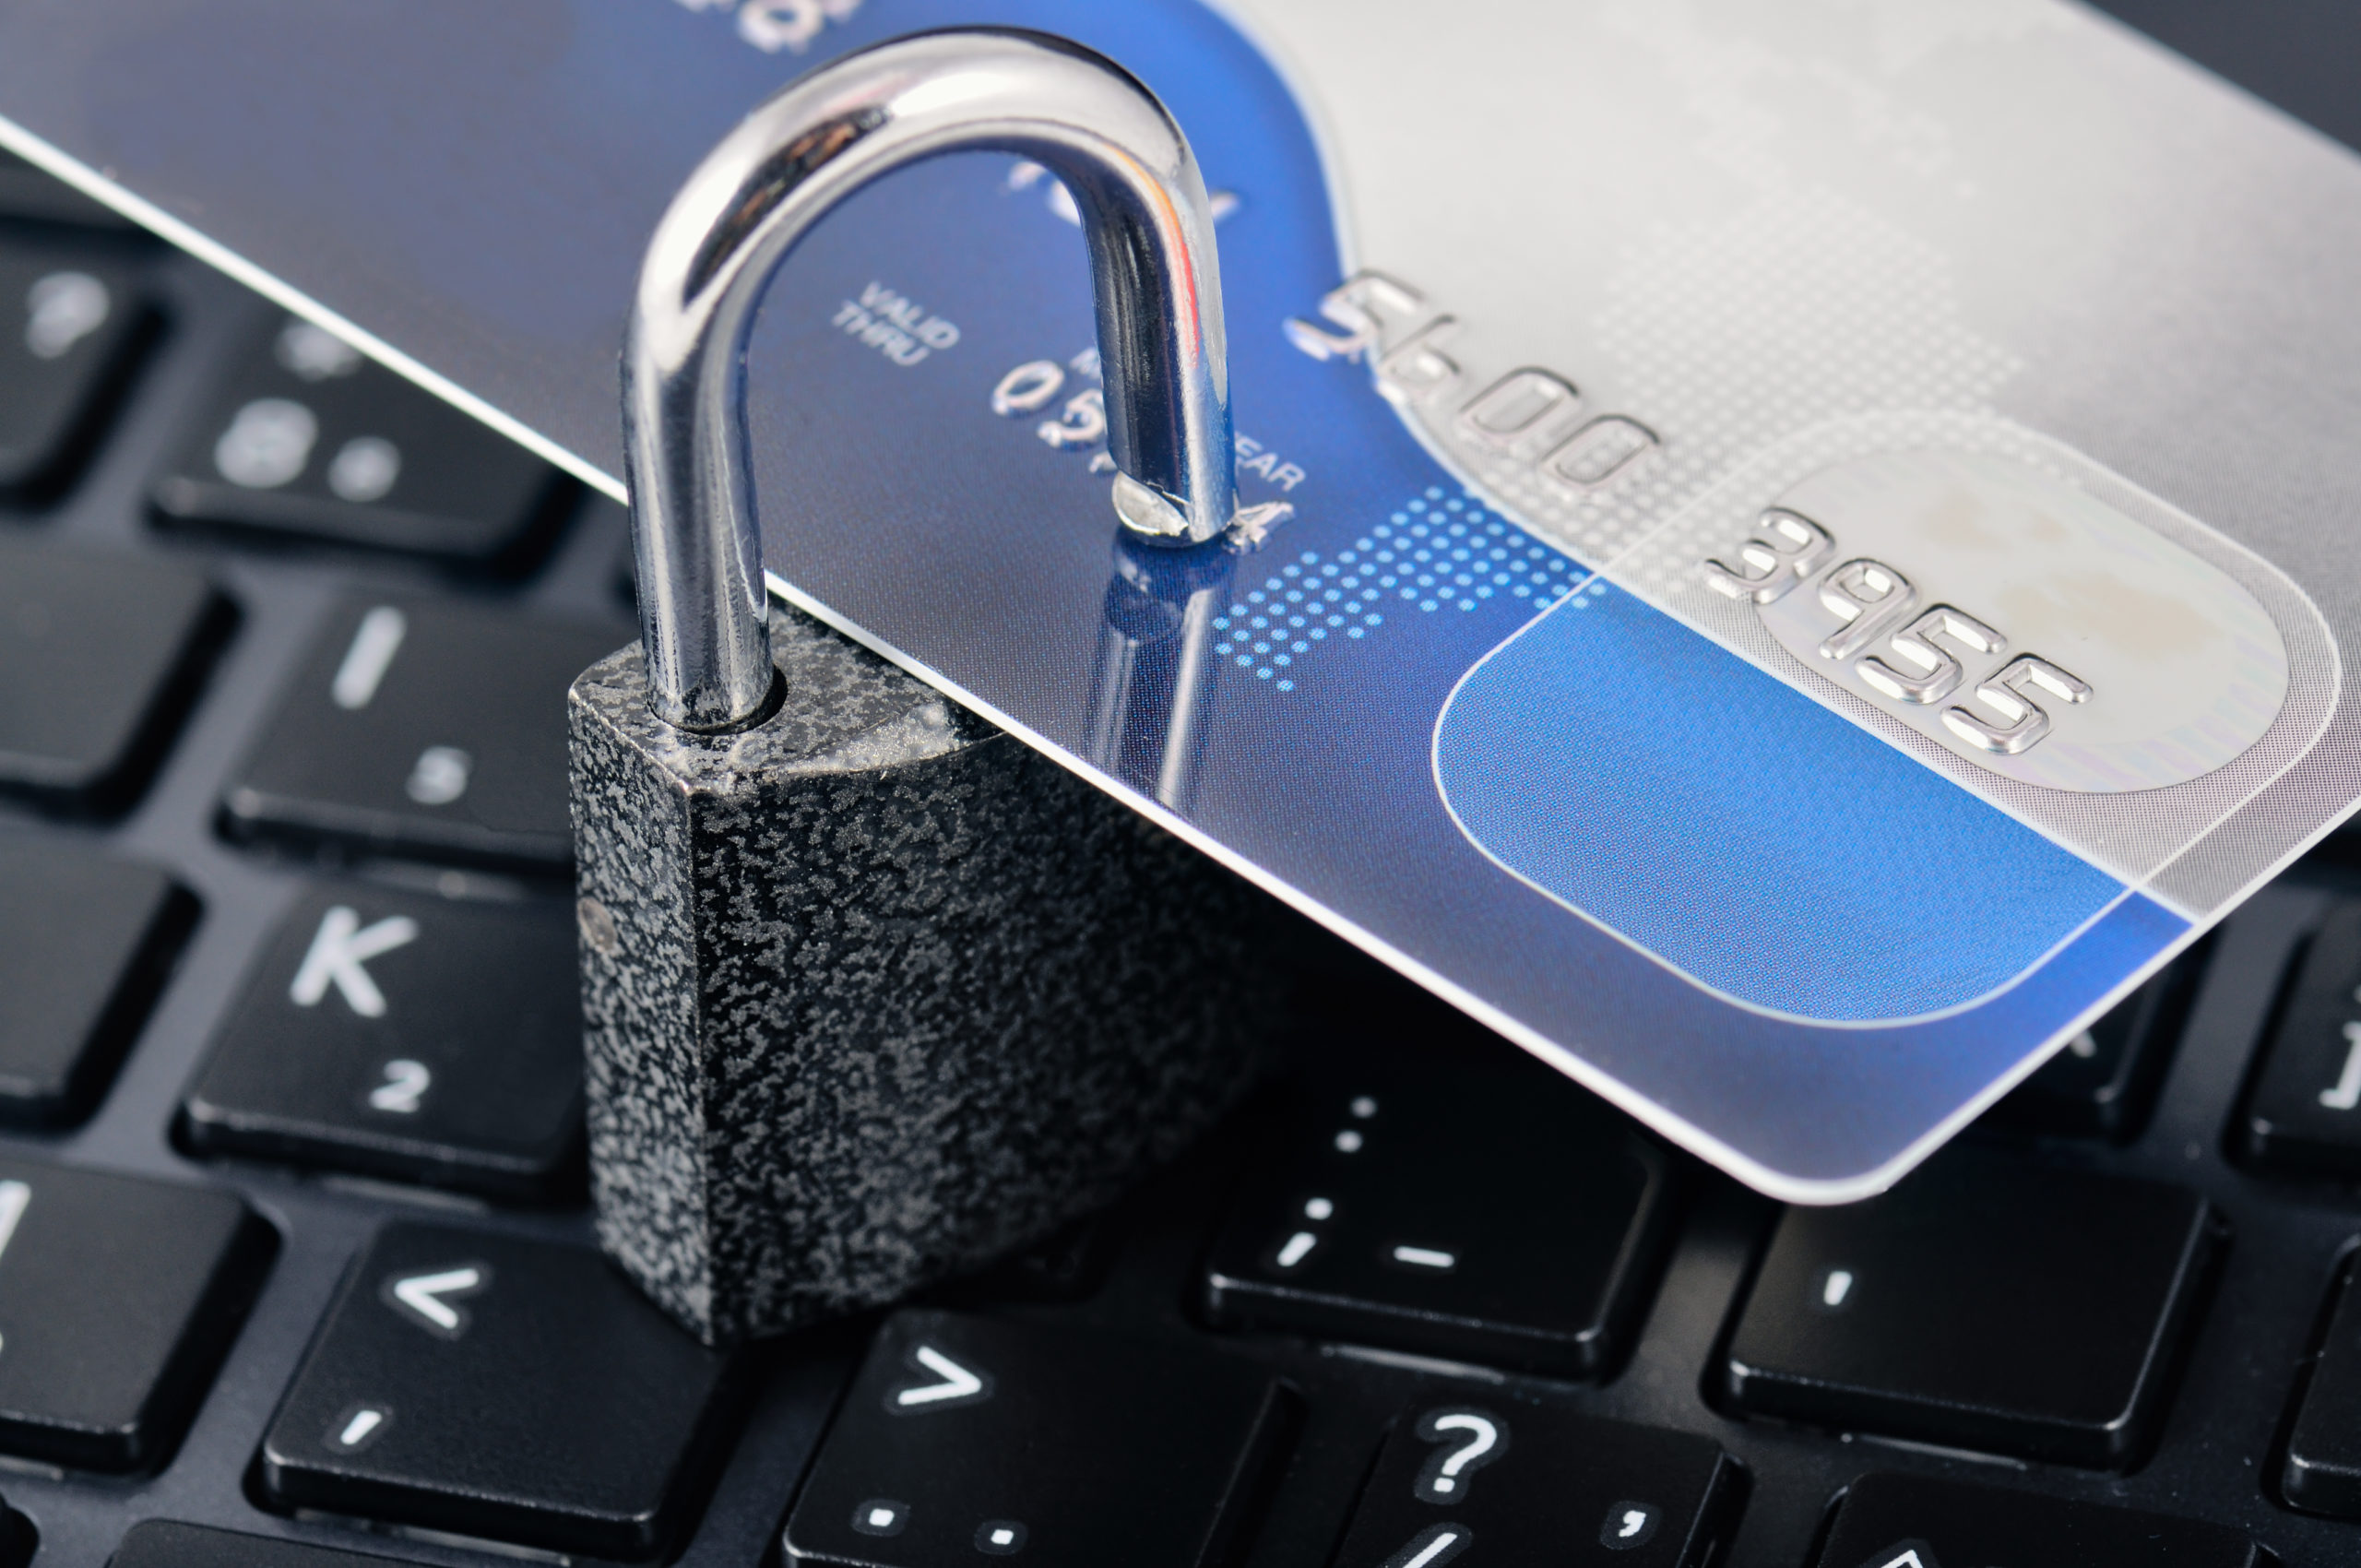 Simple Measures to Reduce Risk of Identity Theft